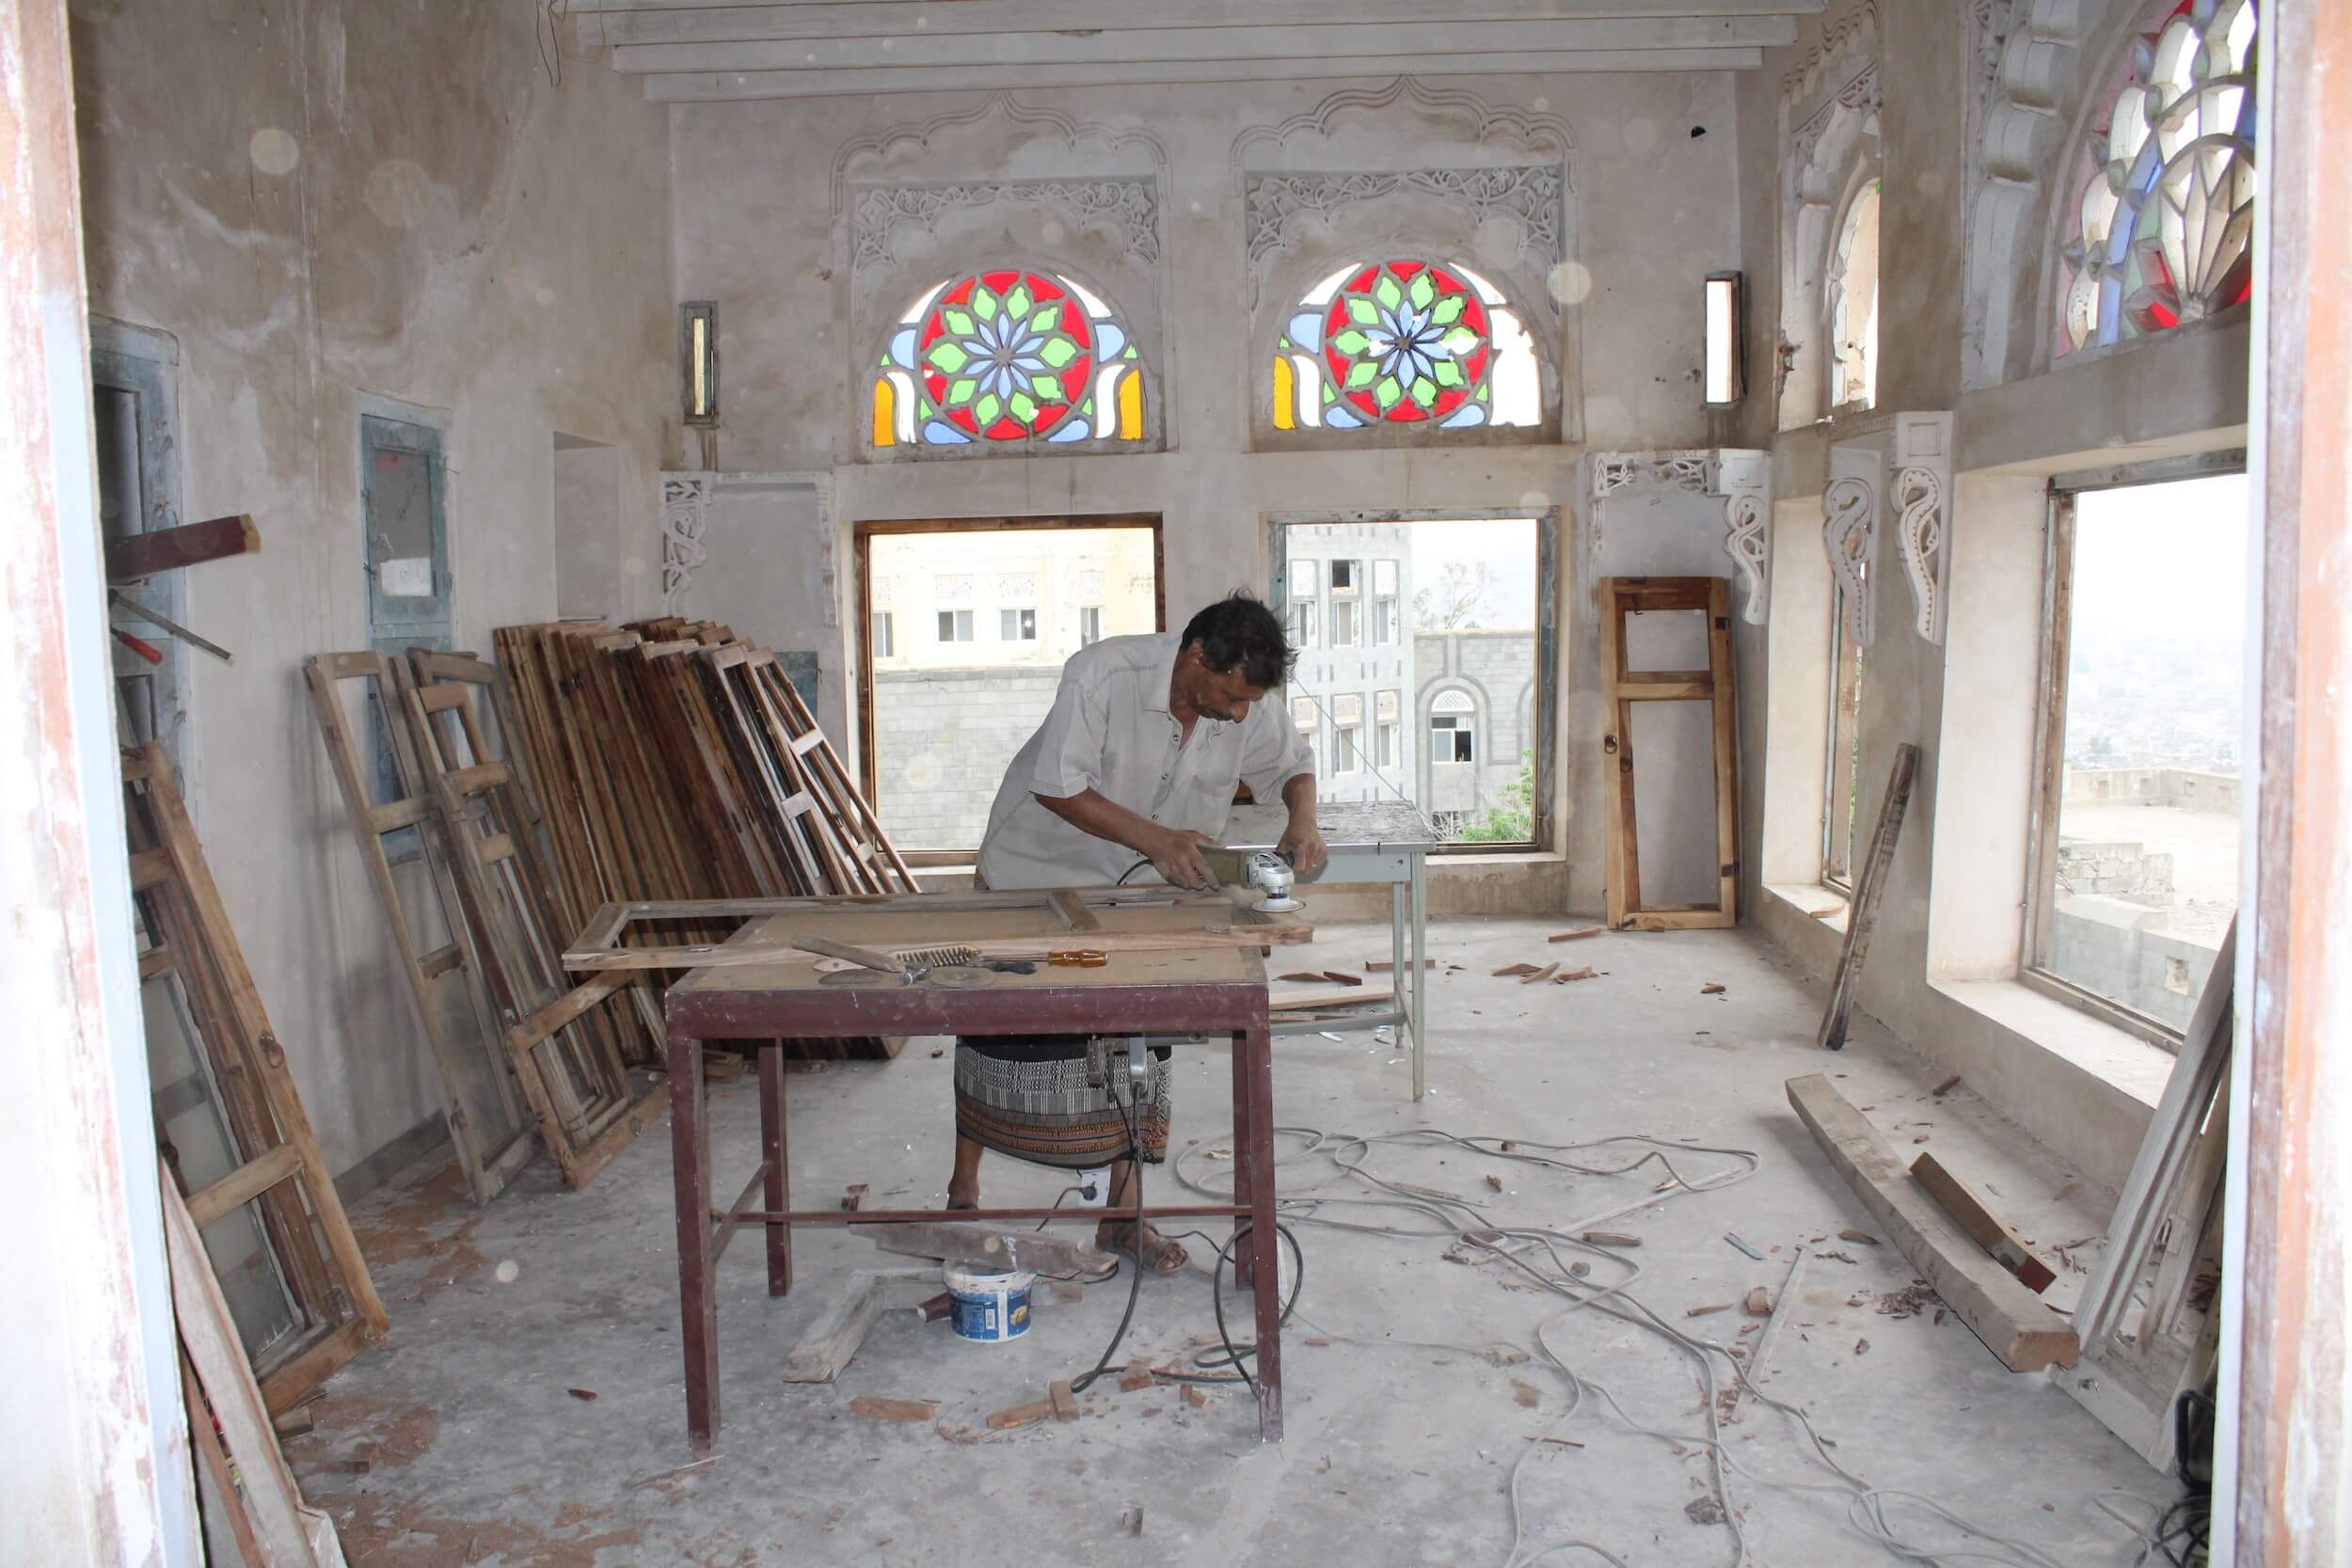 restoration work in a historic palace with stained glass